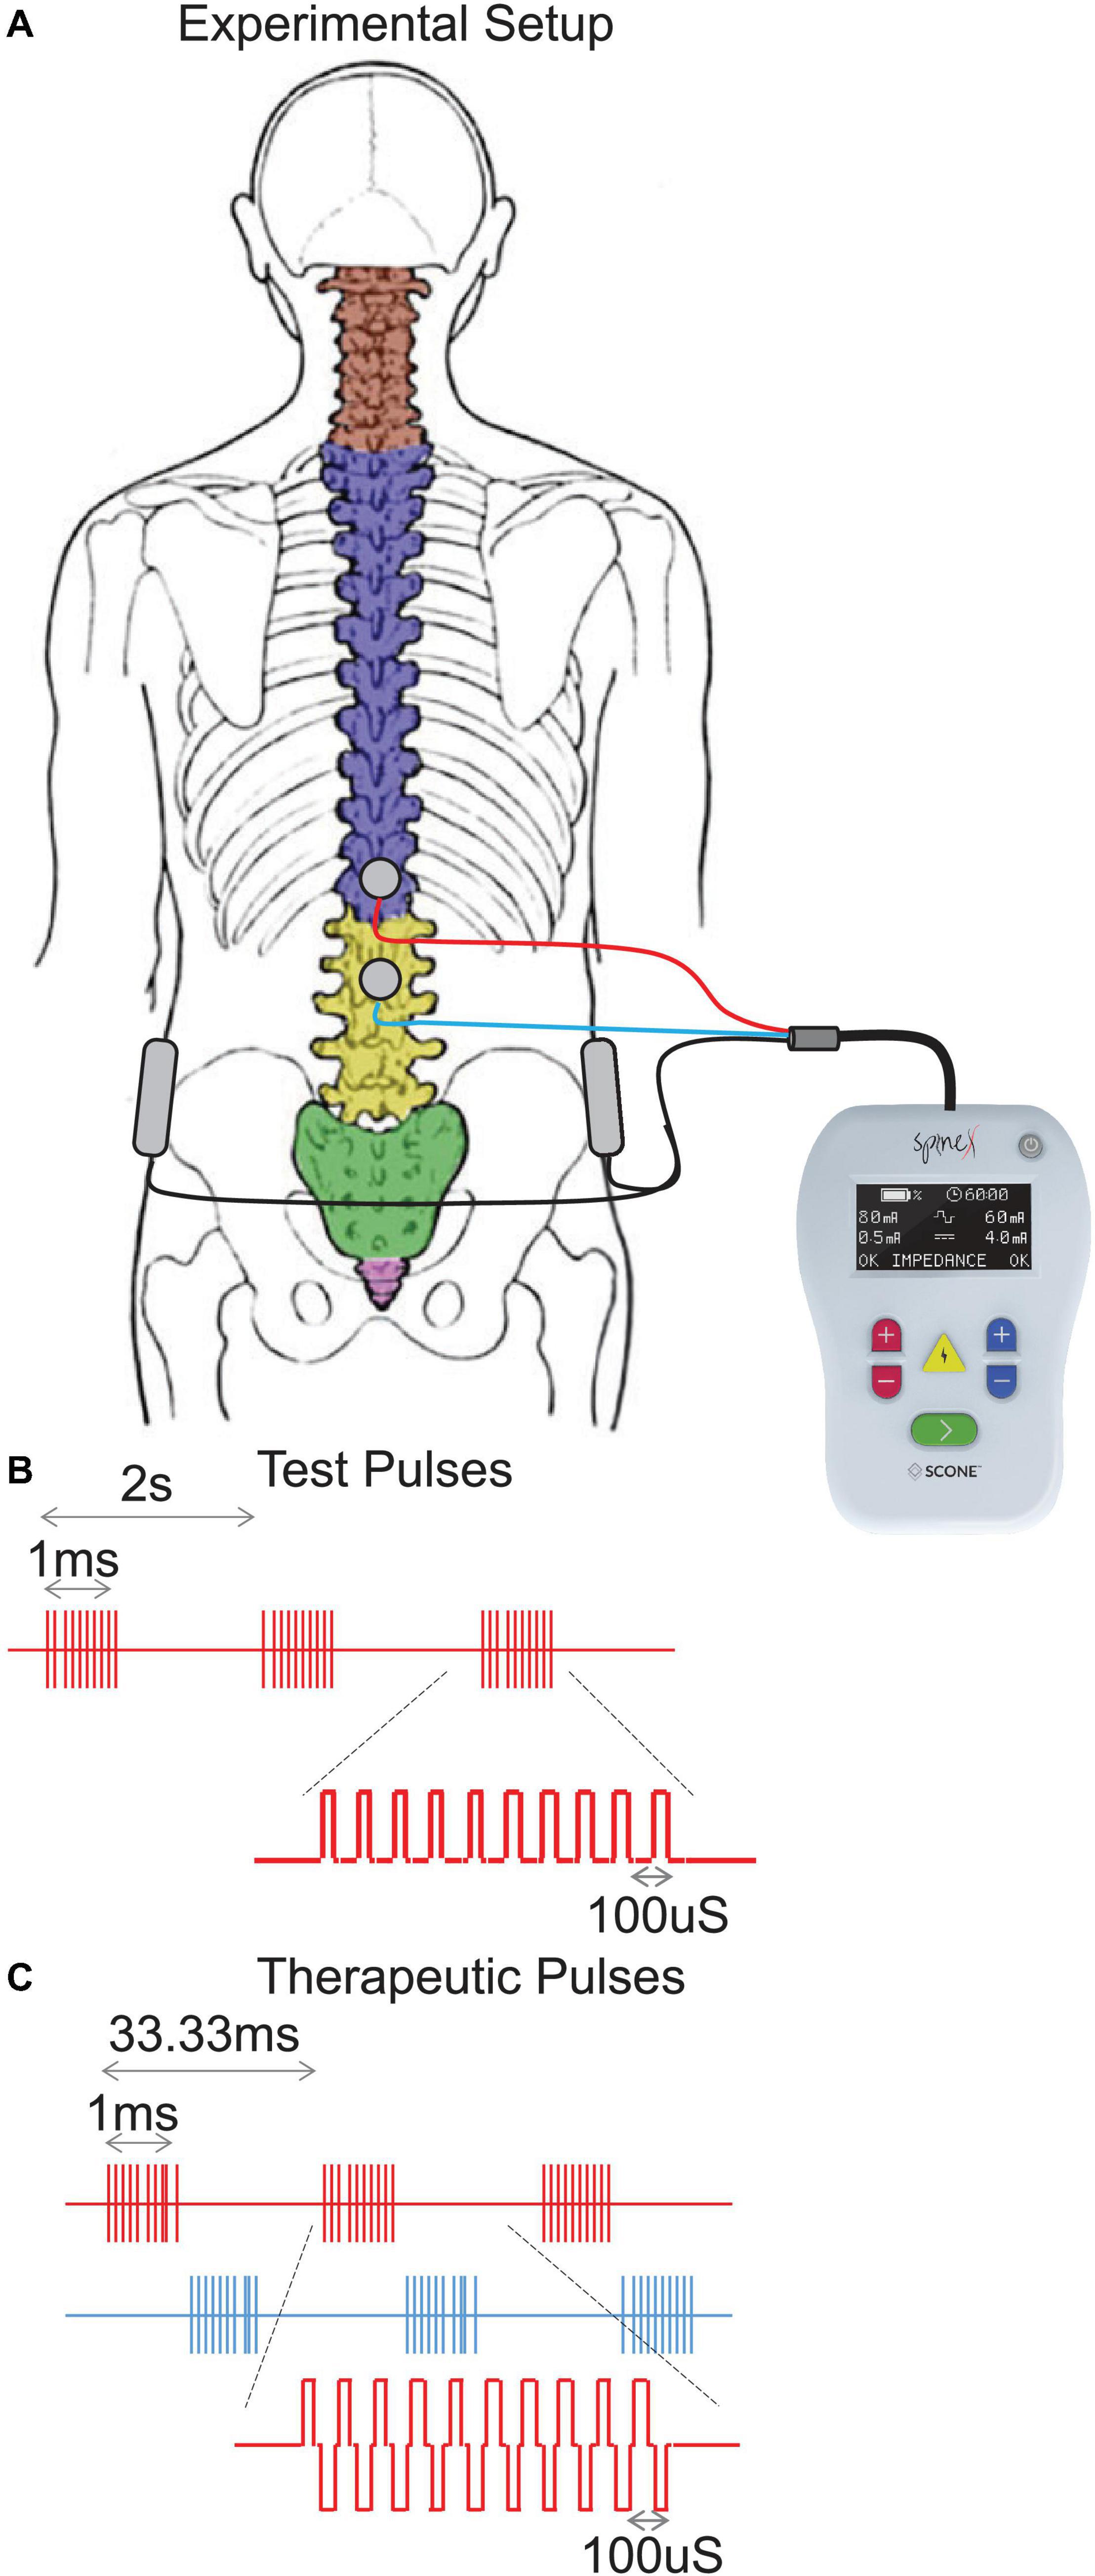 Is it Time to get a Spinal Cord Stimulator?